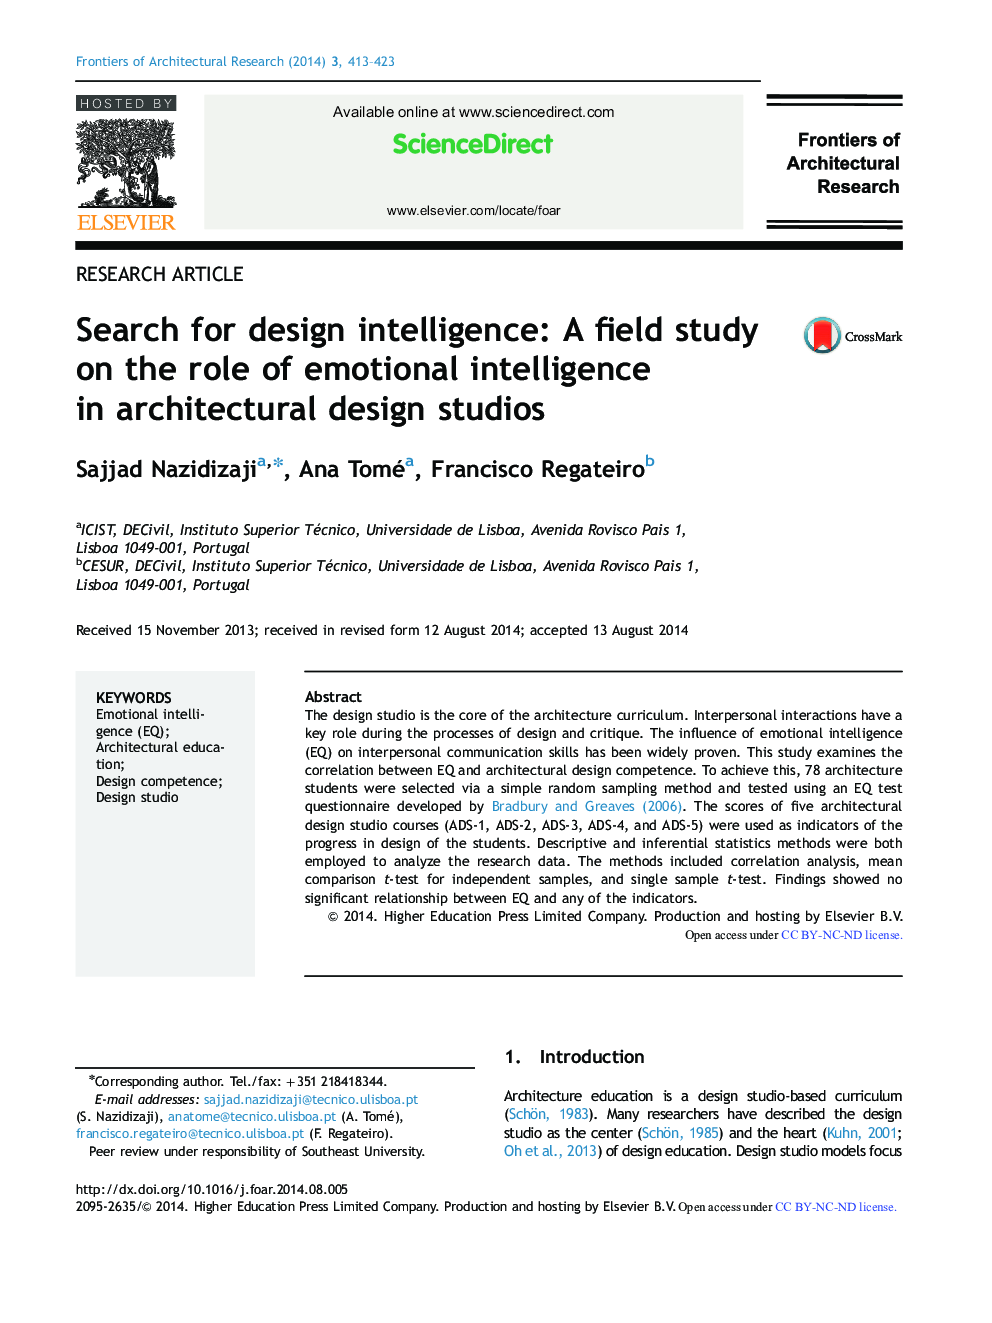 Search for design intelligence: A field study on the role of emotional intelligence in architectural design studios 